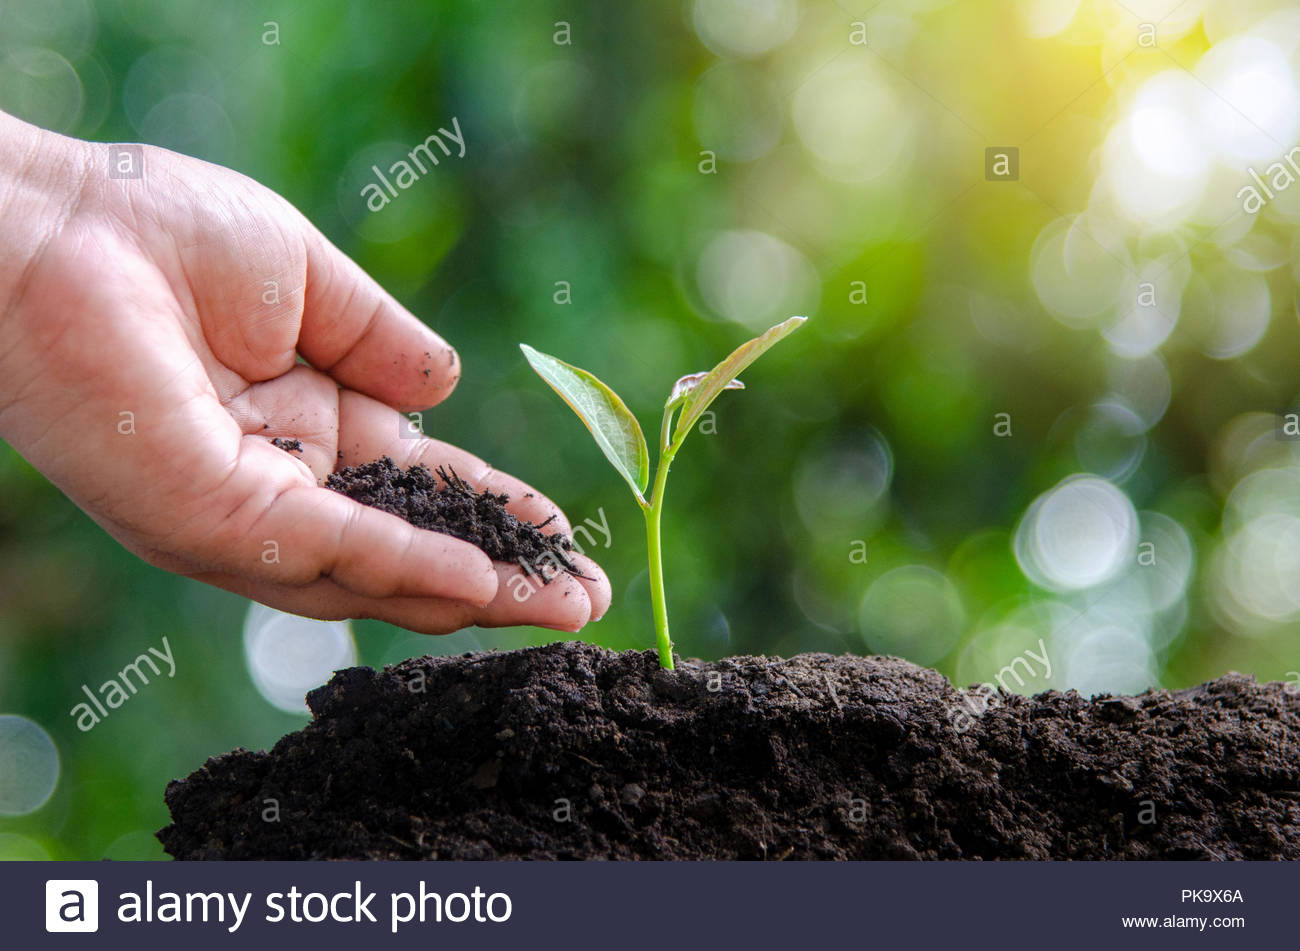 Tree Sapling Hand Planting Sprout In Soil With Sunset Close Up